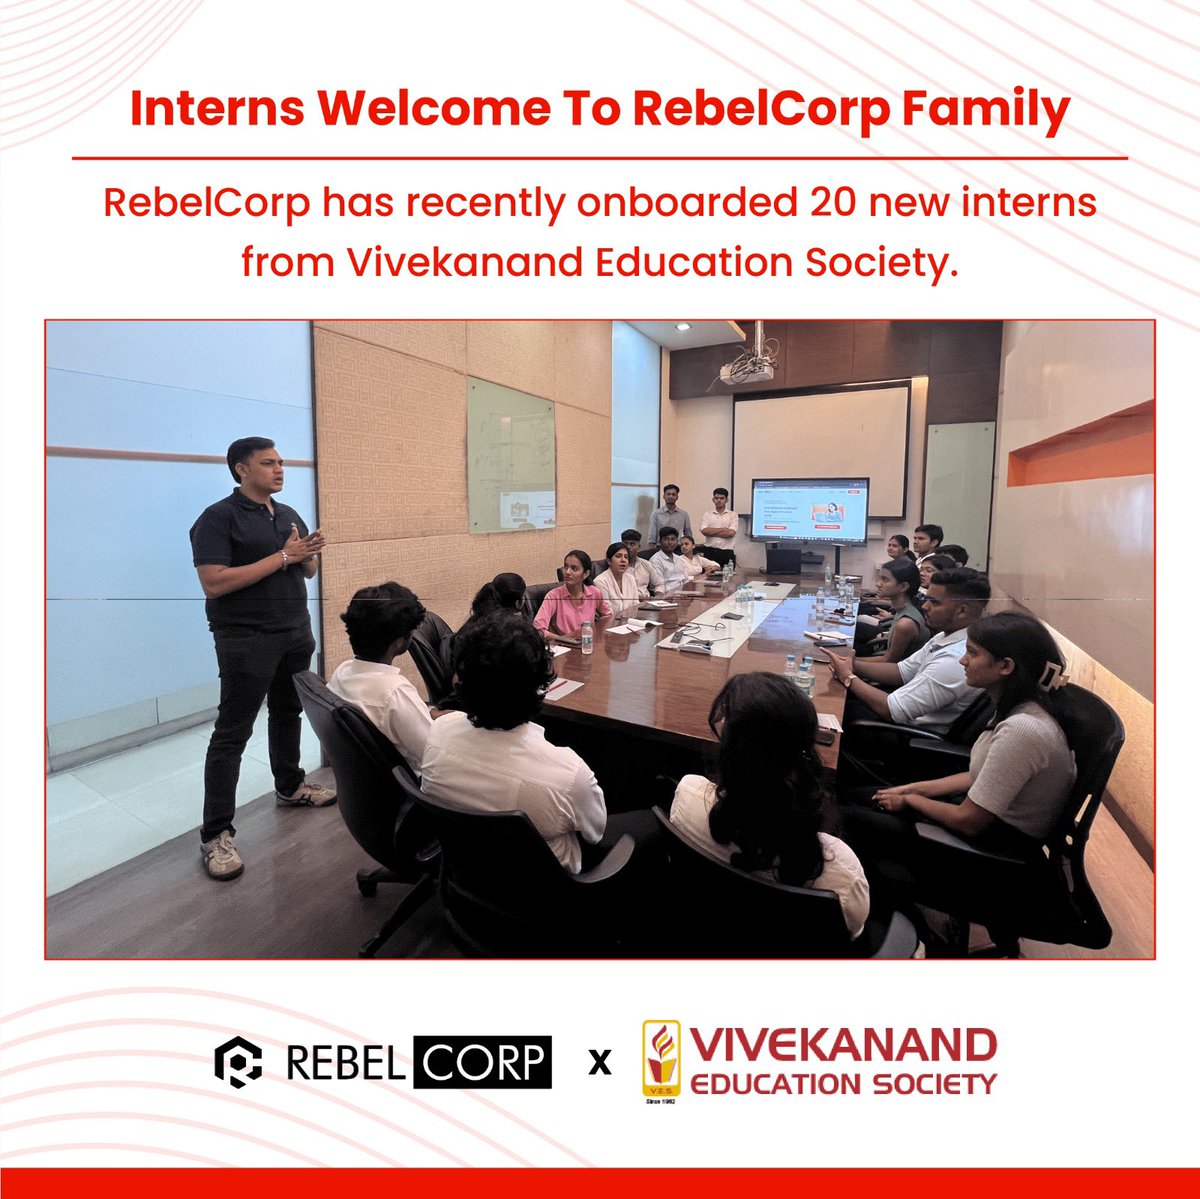 🎉 Welcoming 20 bright minds from Vivekanand Education Society to the RebelCorp family! 🌟 
Here's to a summer of growth, learning, and endless possibilities. 

#RebelCorpInterns #WelcomeToTheTeam #FutureLeaders